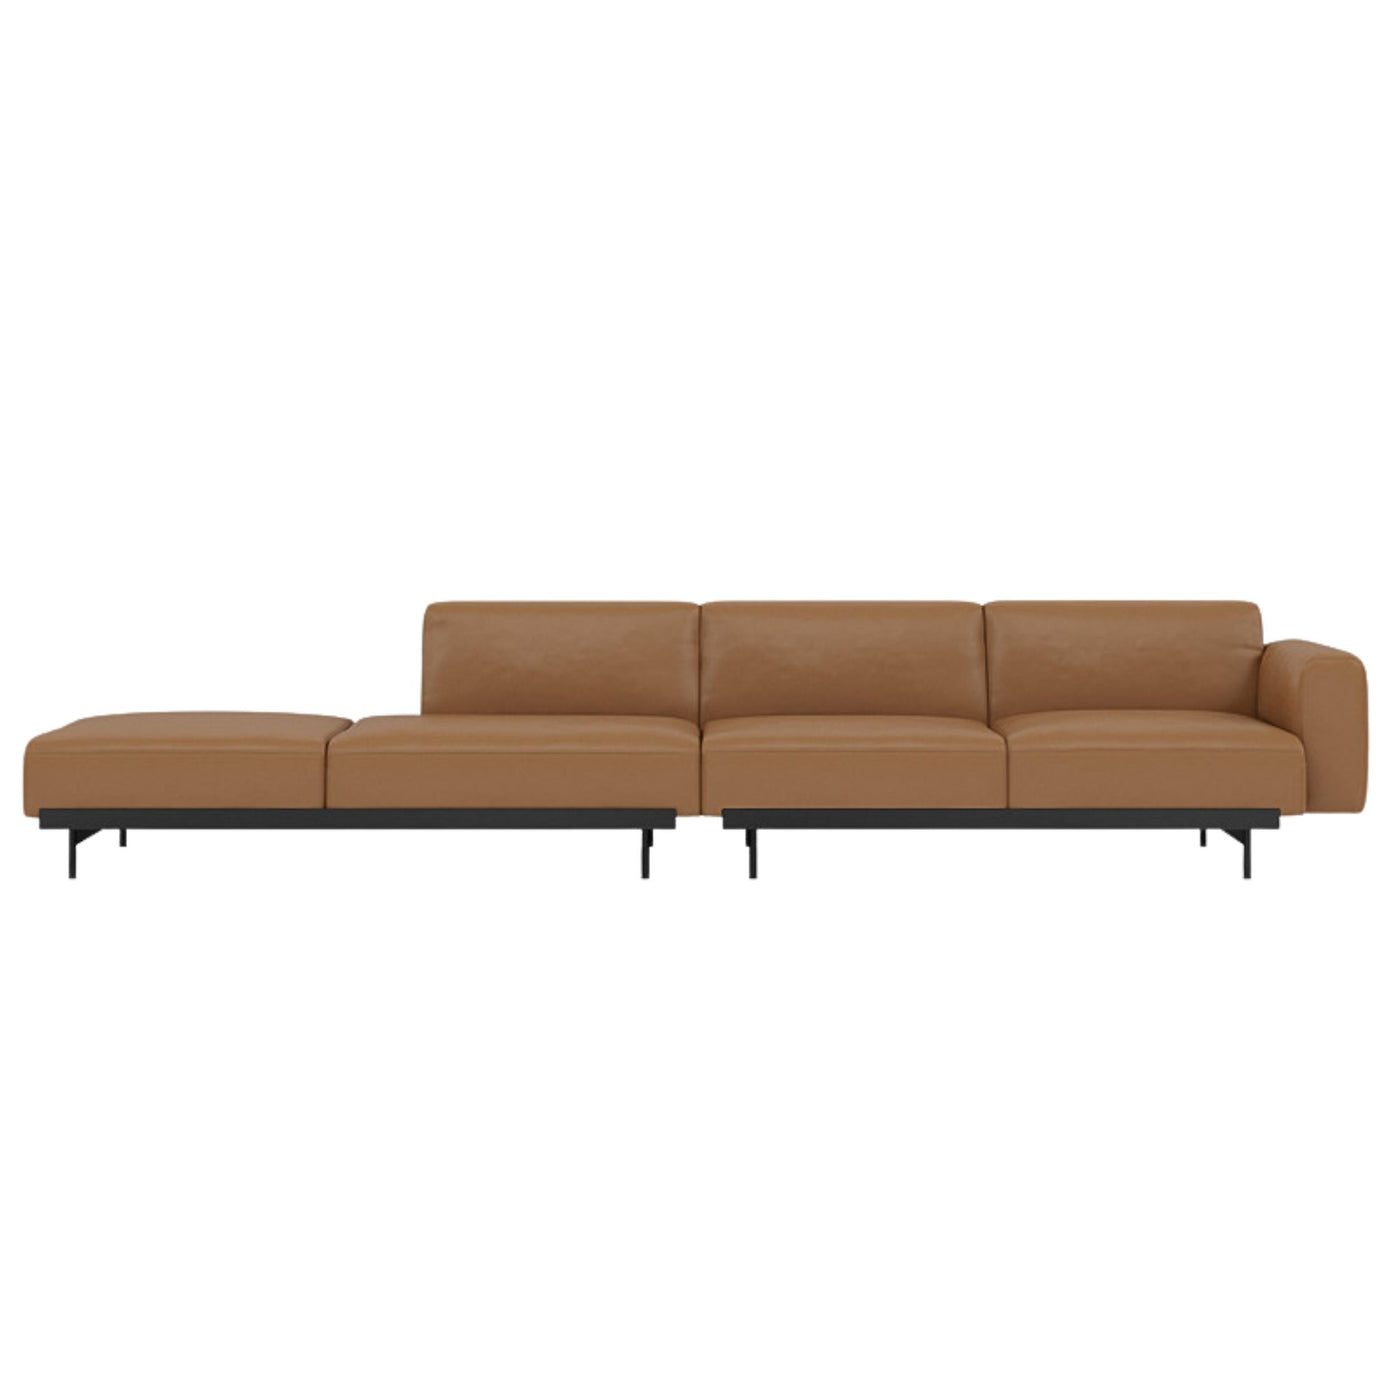 Muuto In Situ Modular 4 Seater Sofa configuration 3. Made to order from someday designs. #colour_cognac-refine-leather